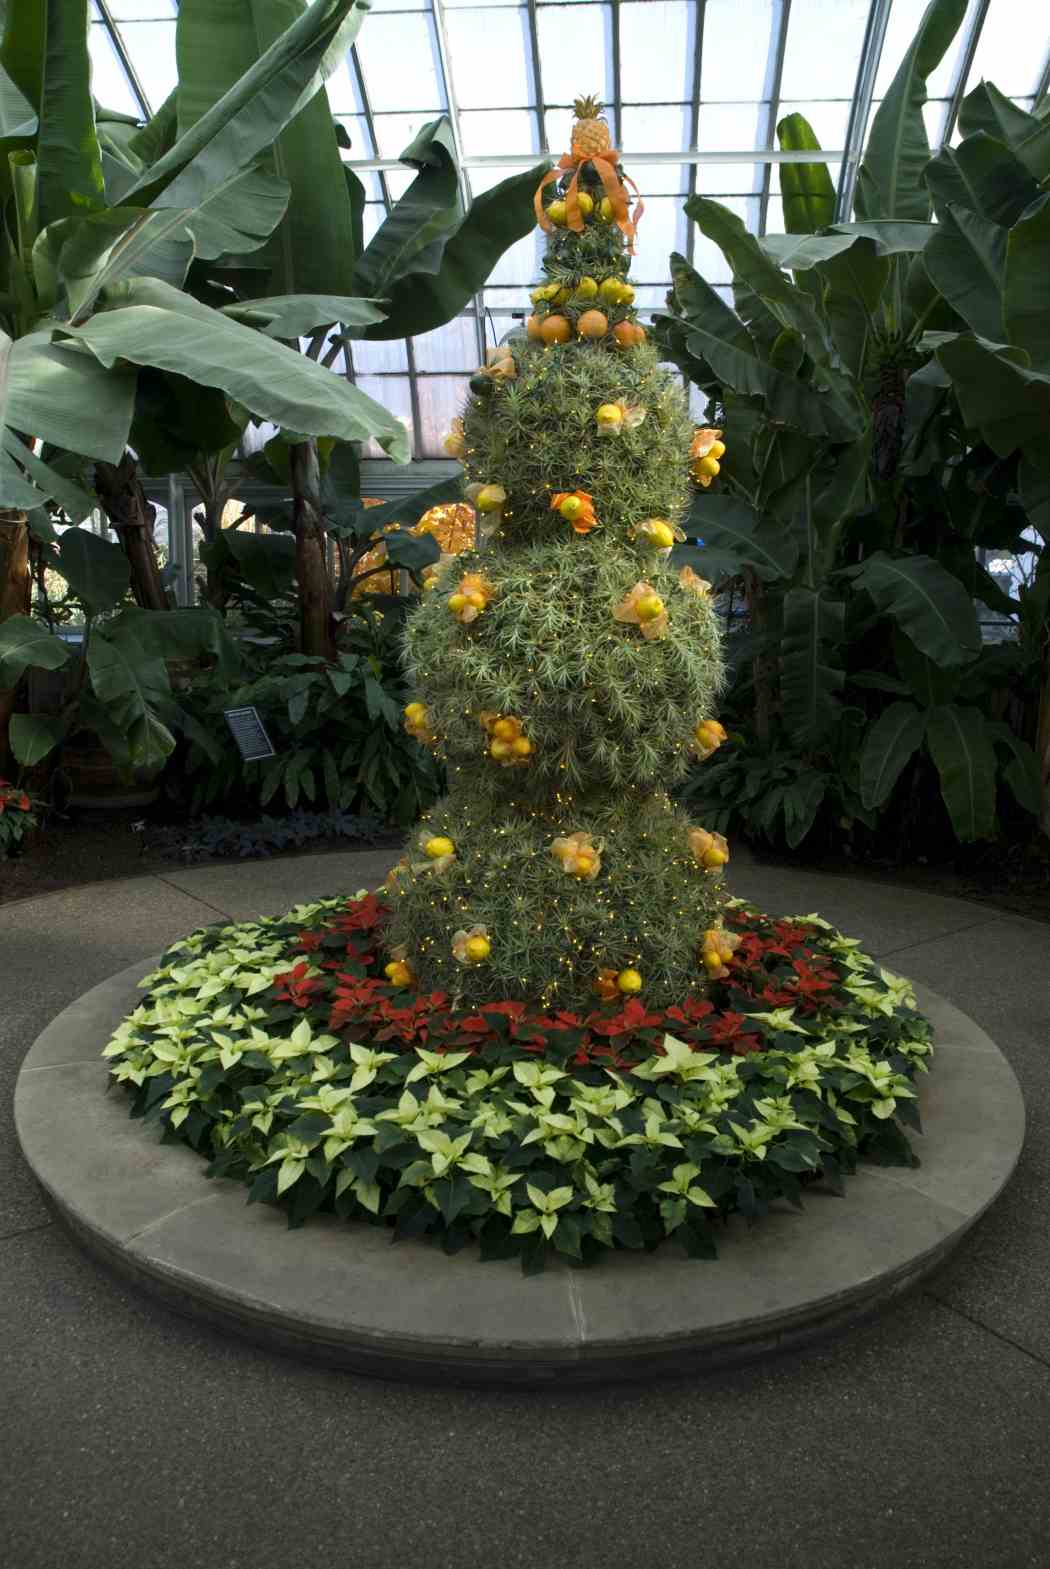 Winter Flower Show 2006: Shades of the Season